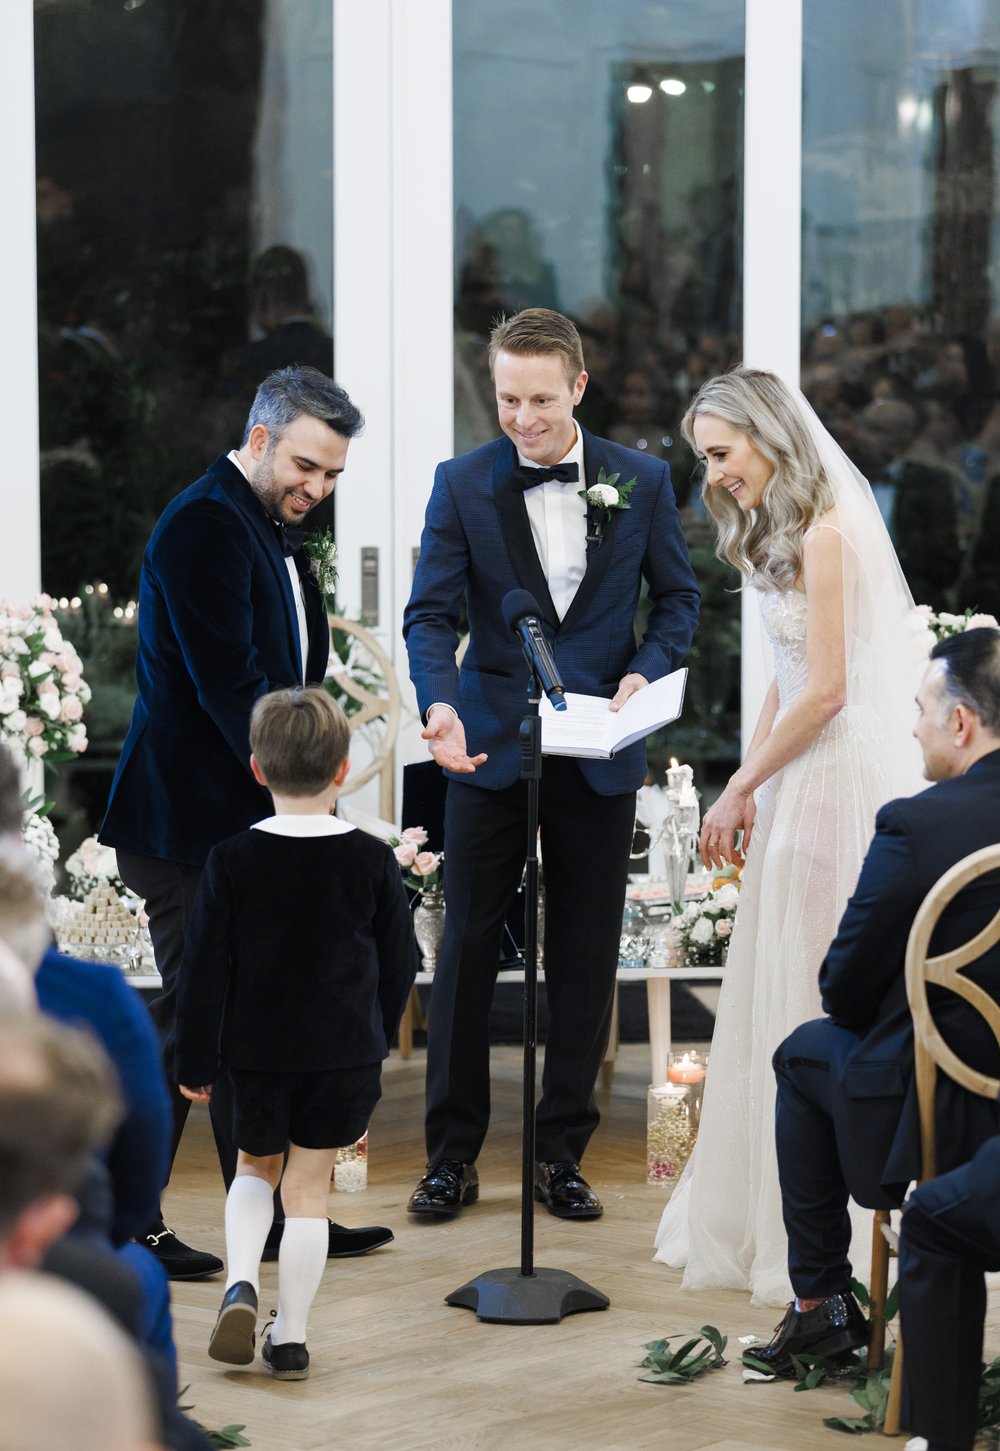  A little ring bearer presents the wedding rings to the couple captured by Savanna Richardson Photography. wedding rings #SavannaRichardsonPhotography #SavannaRichardsonWeddings #NYEwedding #magicalwedding #snowywedding #holidaywedding #married 